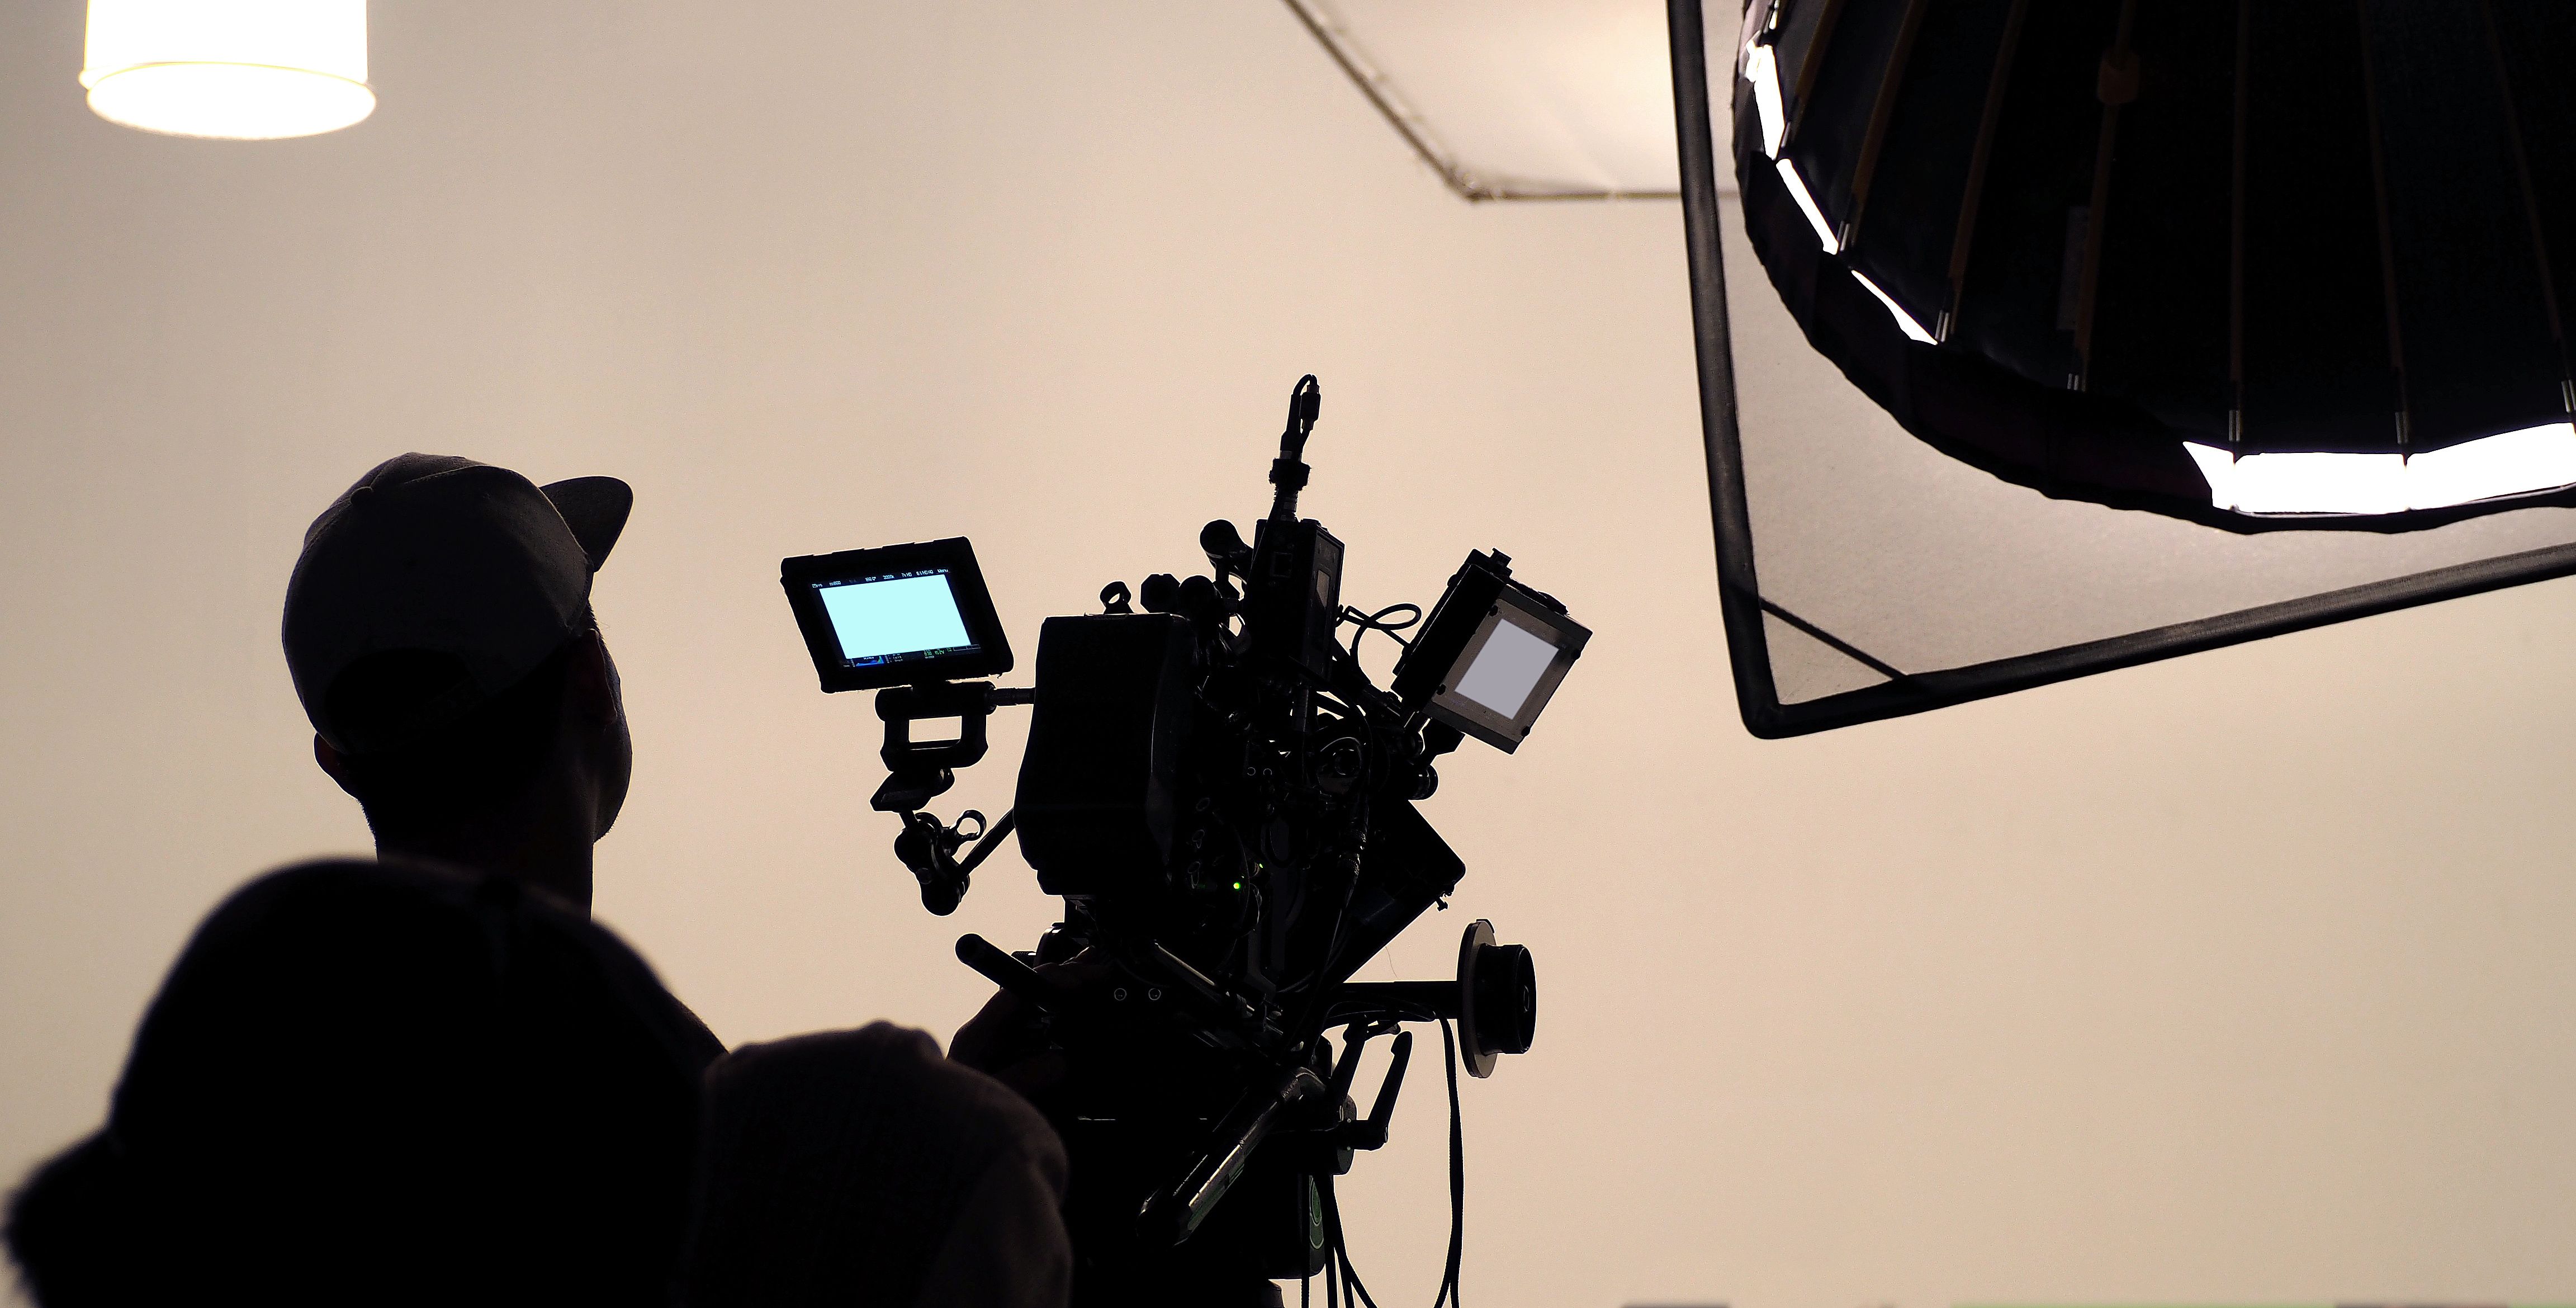 Behind the scenes of The Creative Catapult corporate video production shoot on studio set